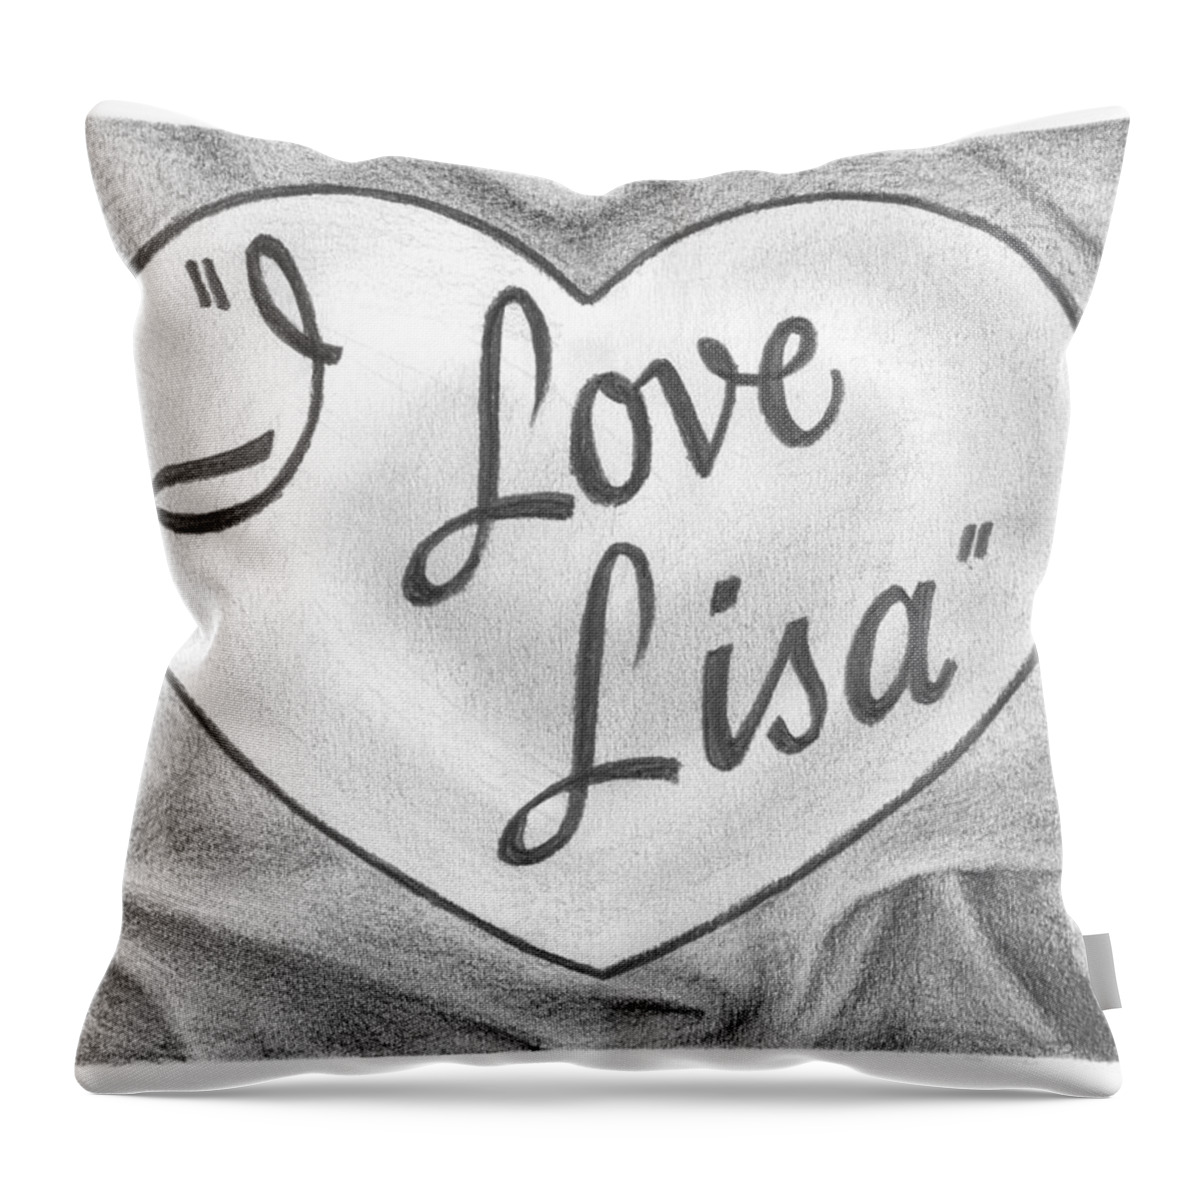 Www.miketheuer.com I Love Lisa Pencil Drawing Mike Theuer Throw Pillow featuring the drawing I love Lisa pencil drawing by Mike Theuer